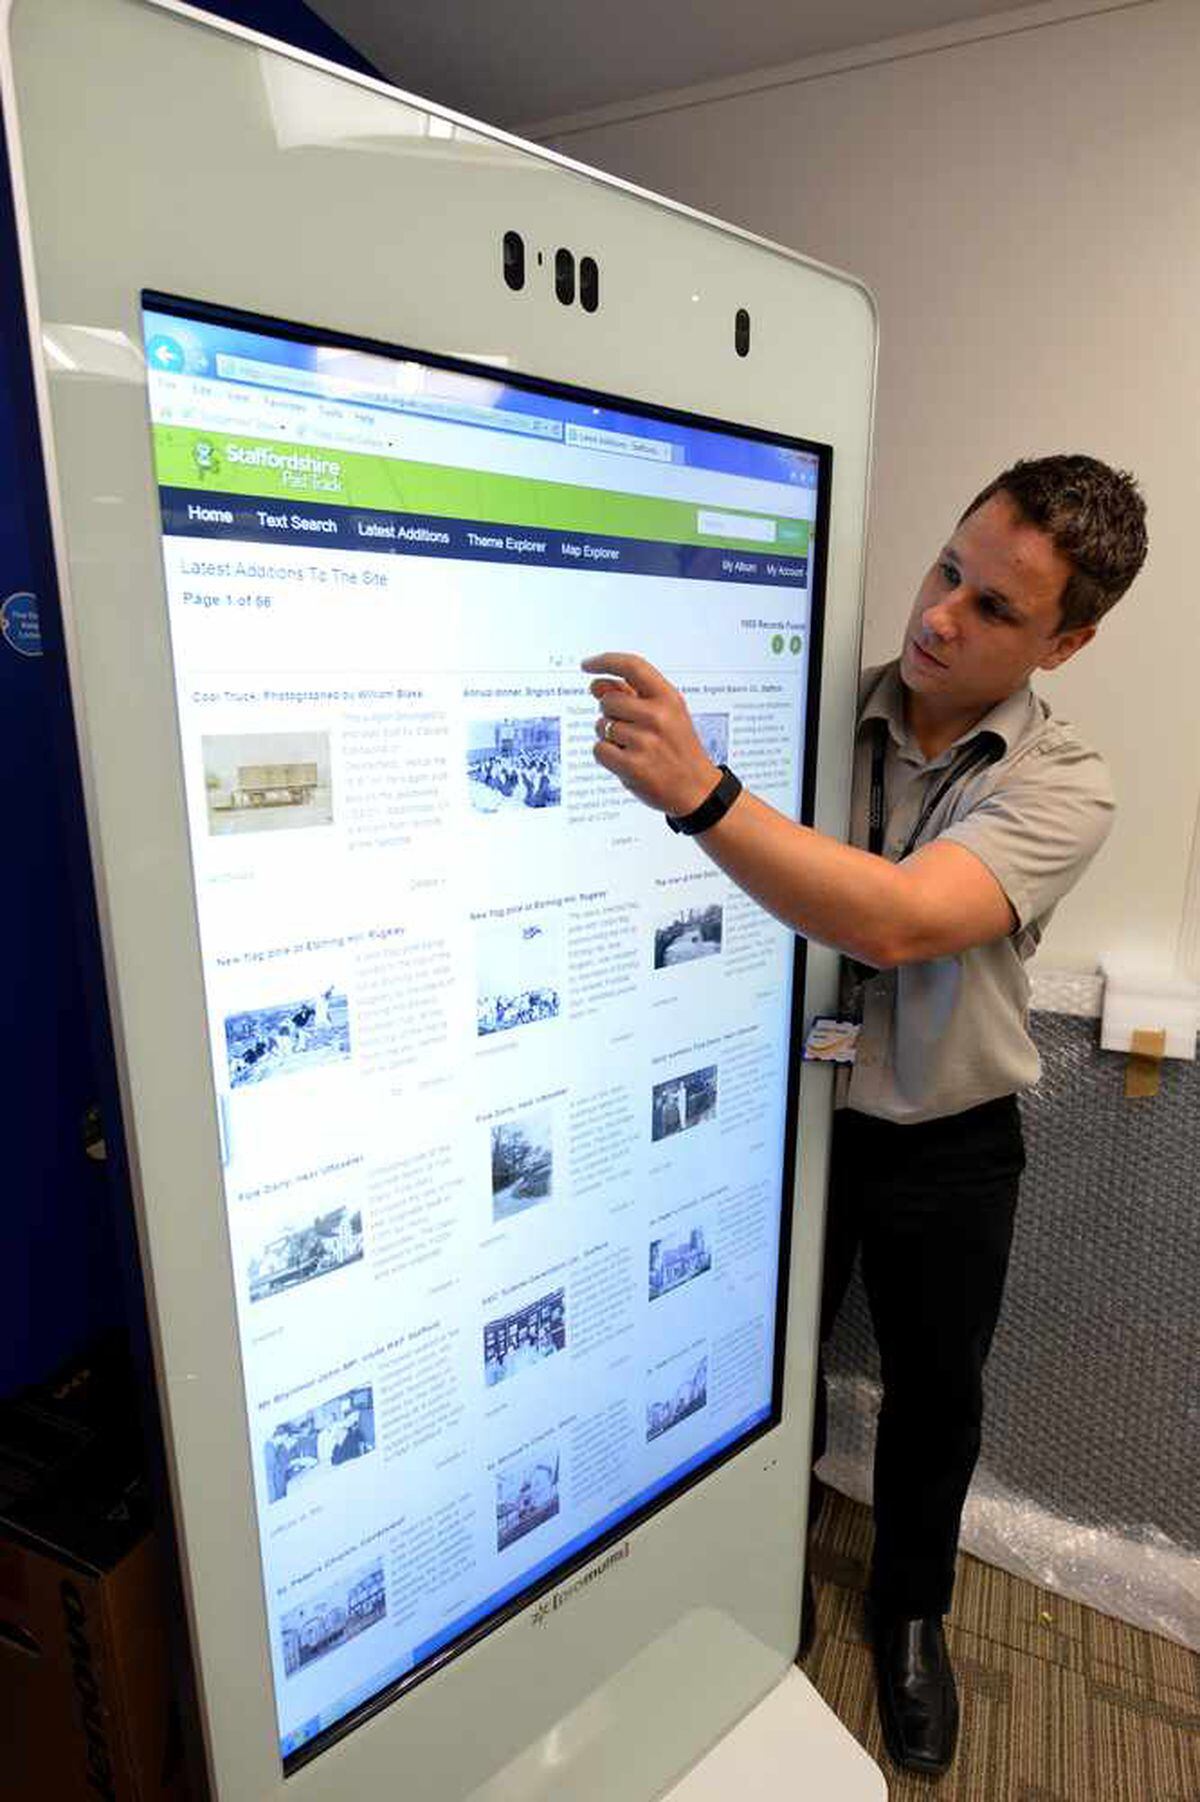 Lyndon Cheney from ITC support with the new welcome touch screen display